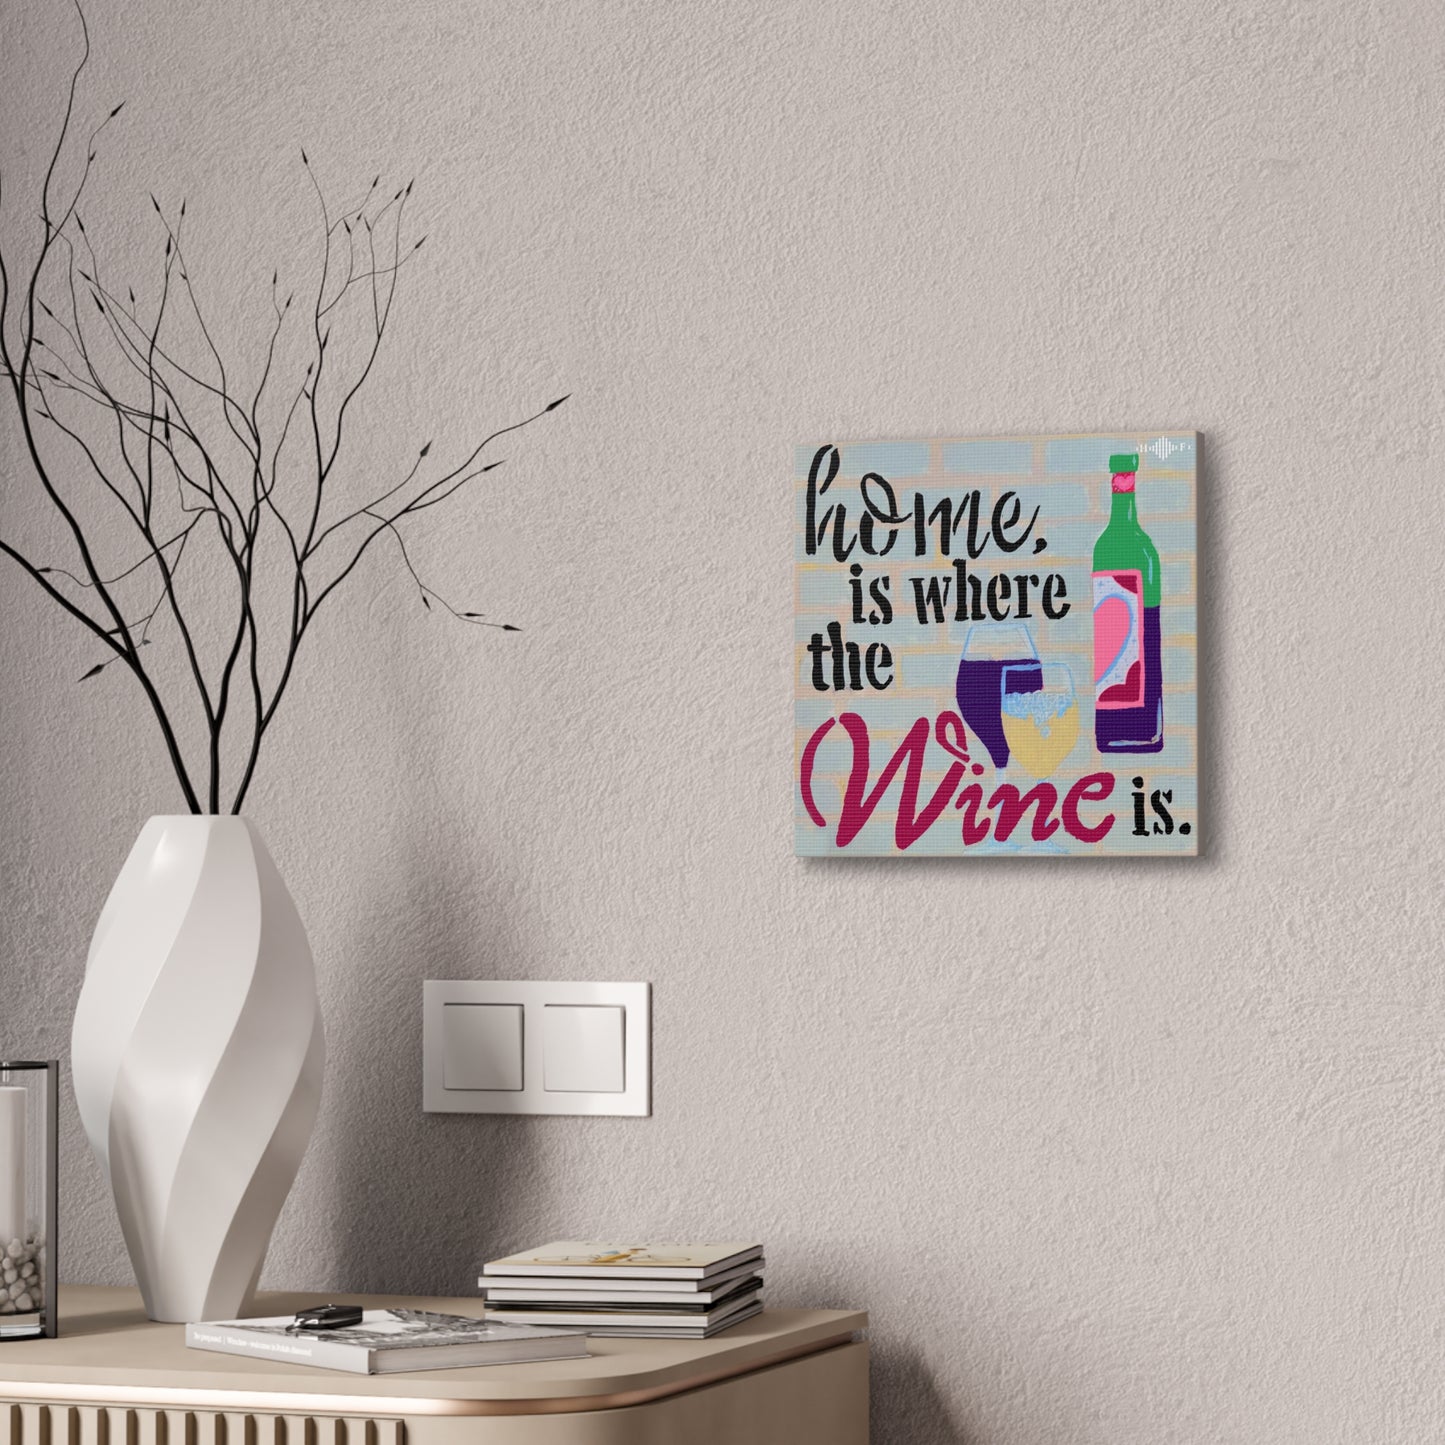 Wine Time - Canvas Stretched, 0.75"